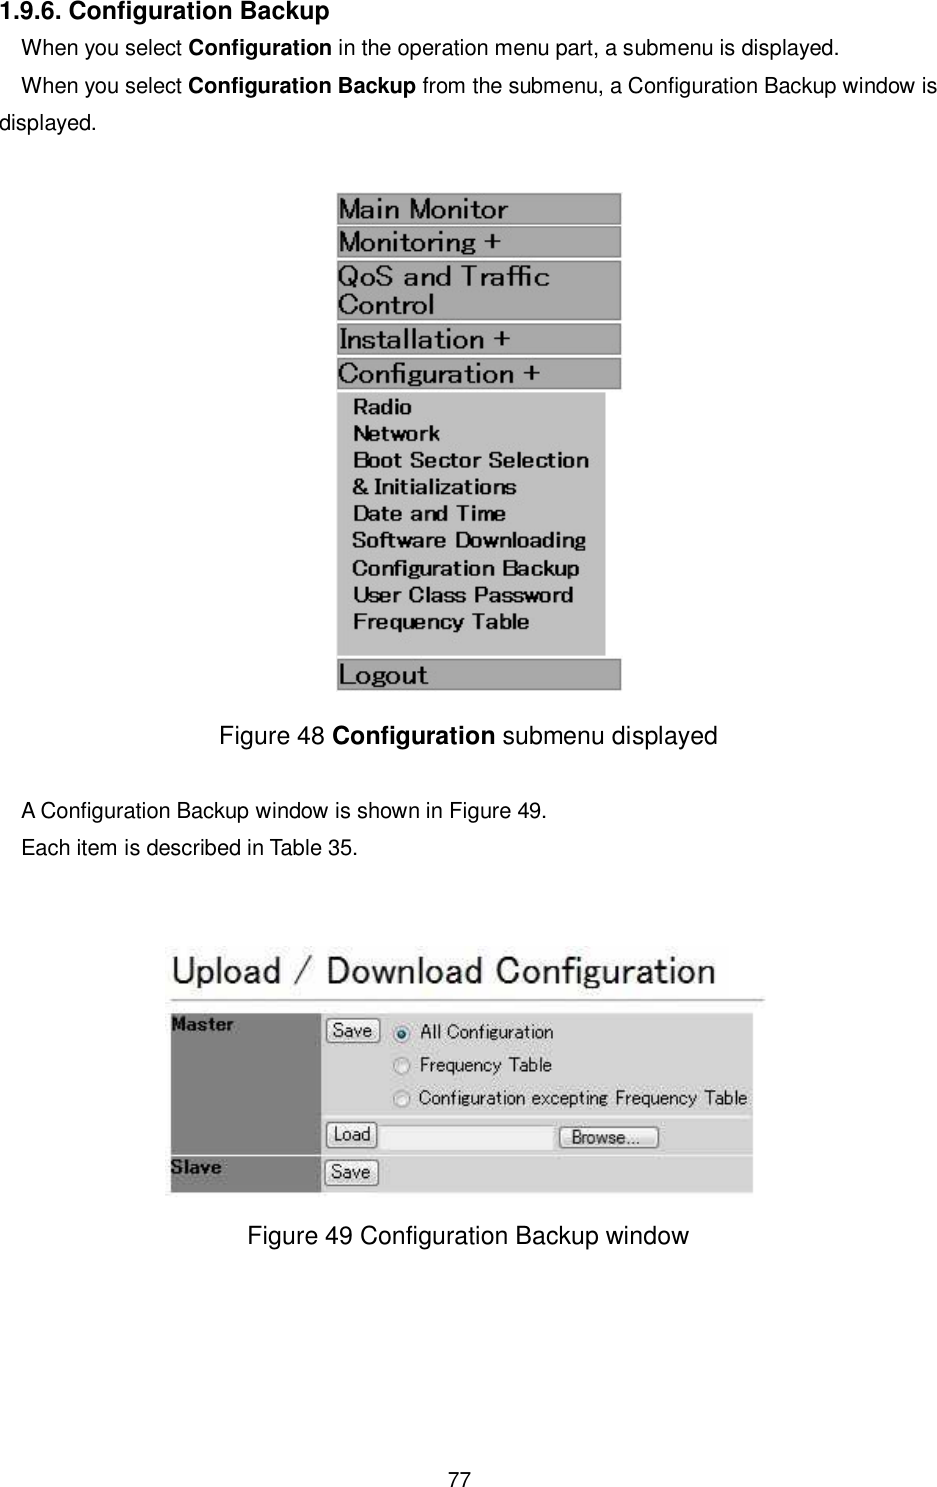    77  1.9.6. Configuration Backup When you select Configuration in the operation menu part, a submenu is displayed. When you select Configuration Backup from the submenu, a Configuration Backup window is displayed.   Figure 48 Configuration submenu displayed  A Configuration Backup window is shown in Figure 49. Each item is described in Table 35.    Figure 49 Configuration Backup window  